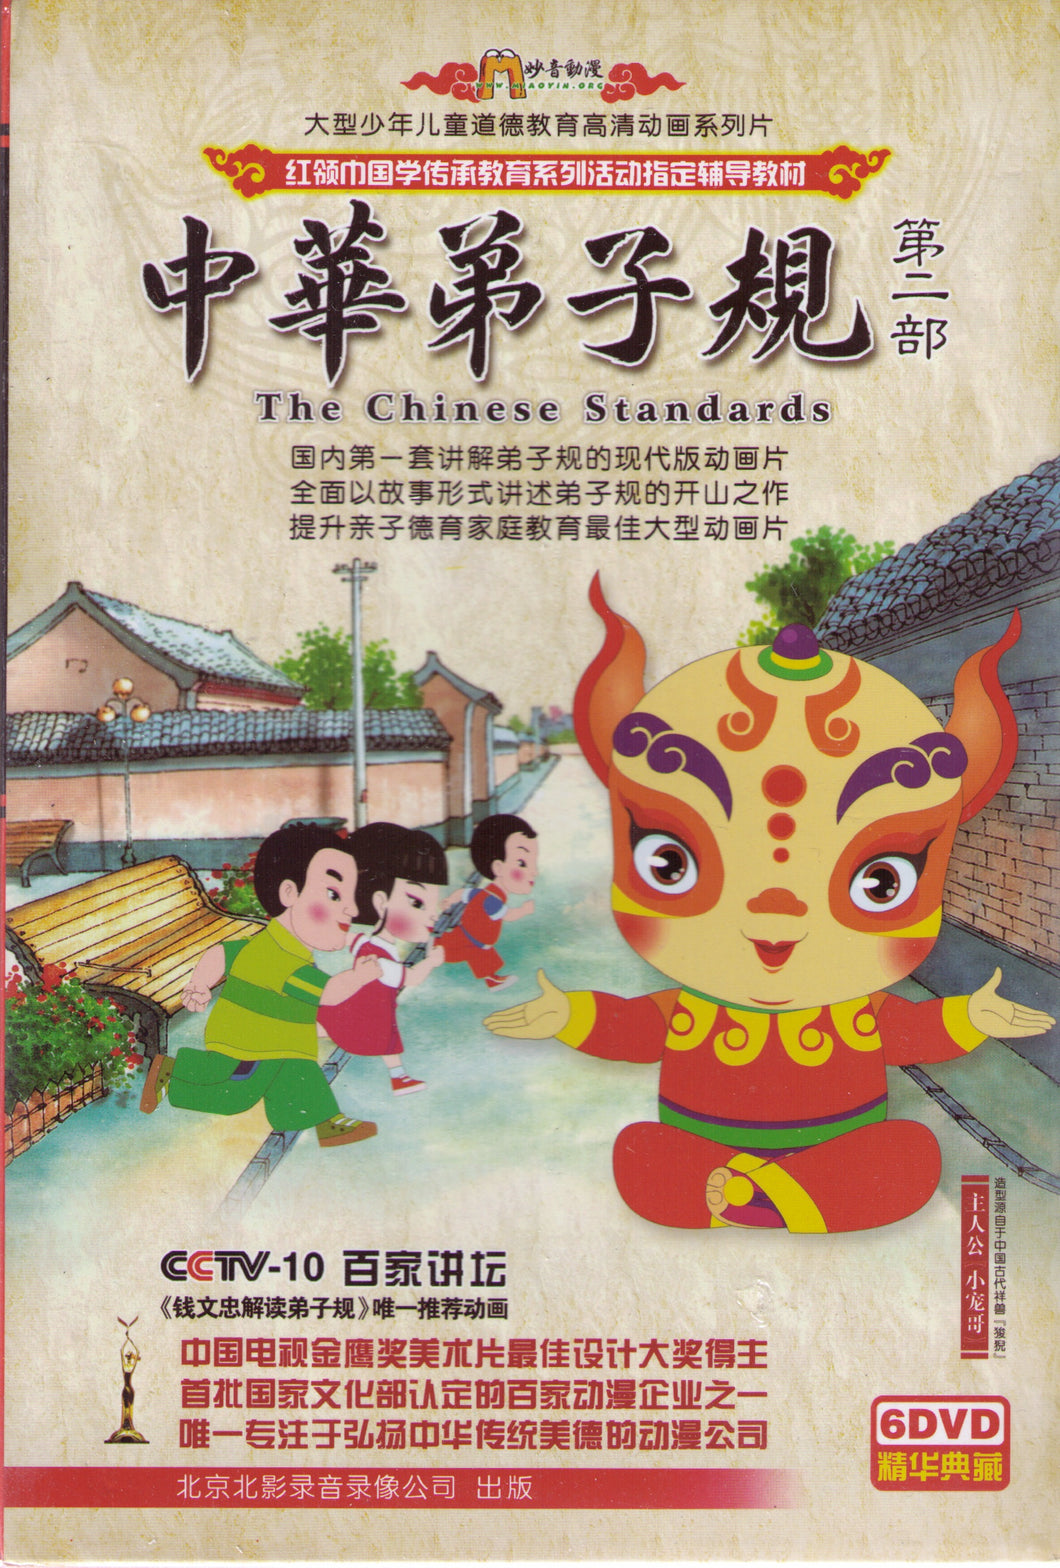 The Chinese Standards DVDs 中華弟子規